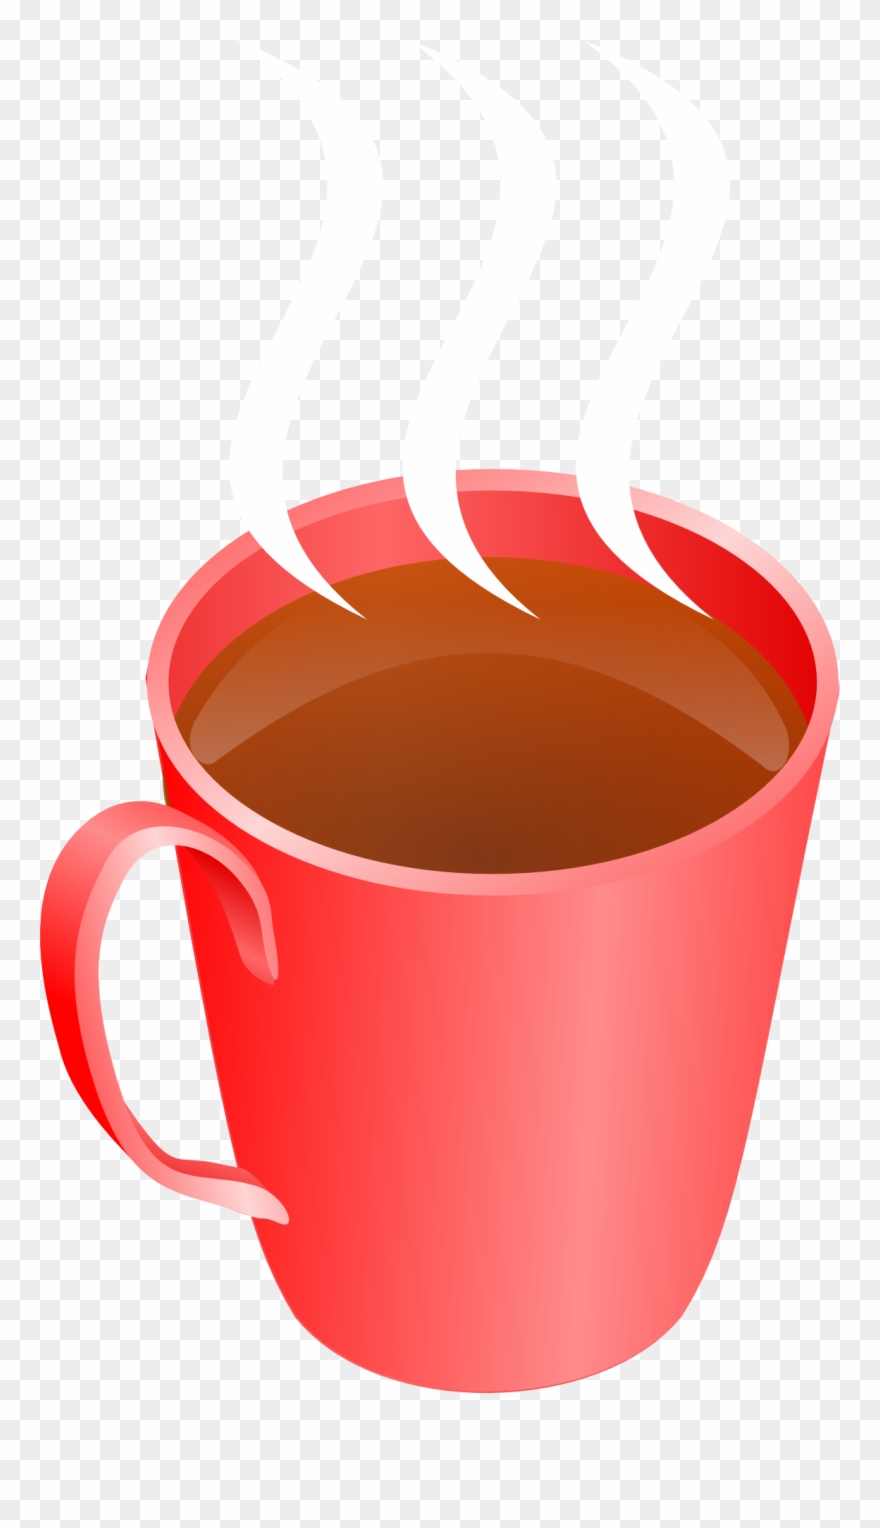 Coffee Steaming Hot Drink Cup Transparent Image.